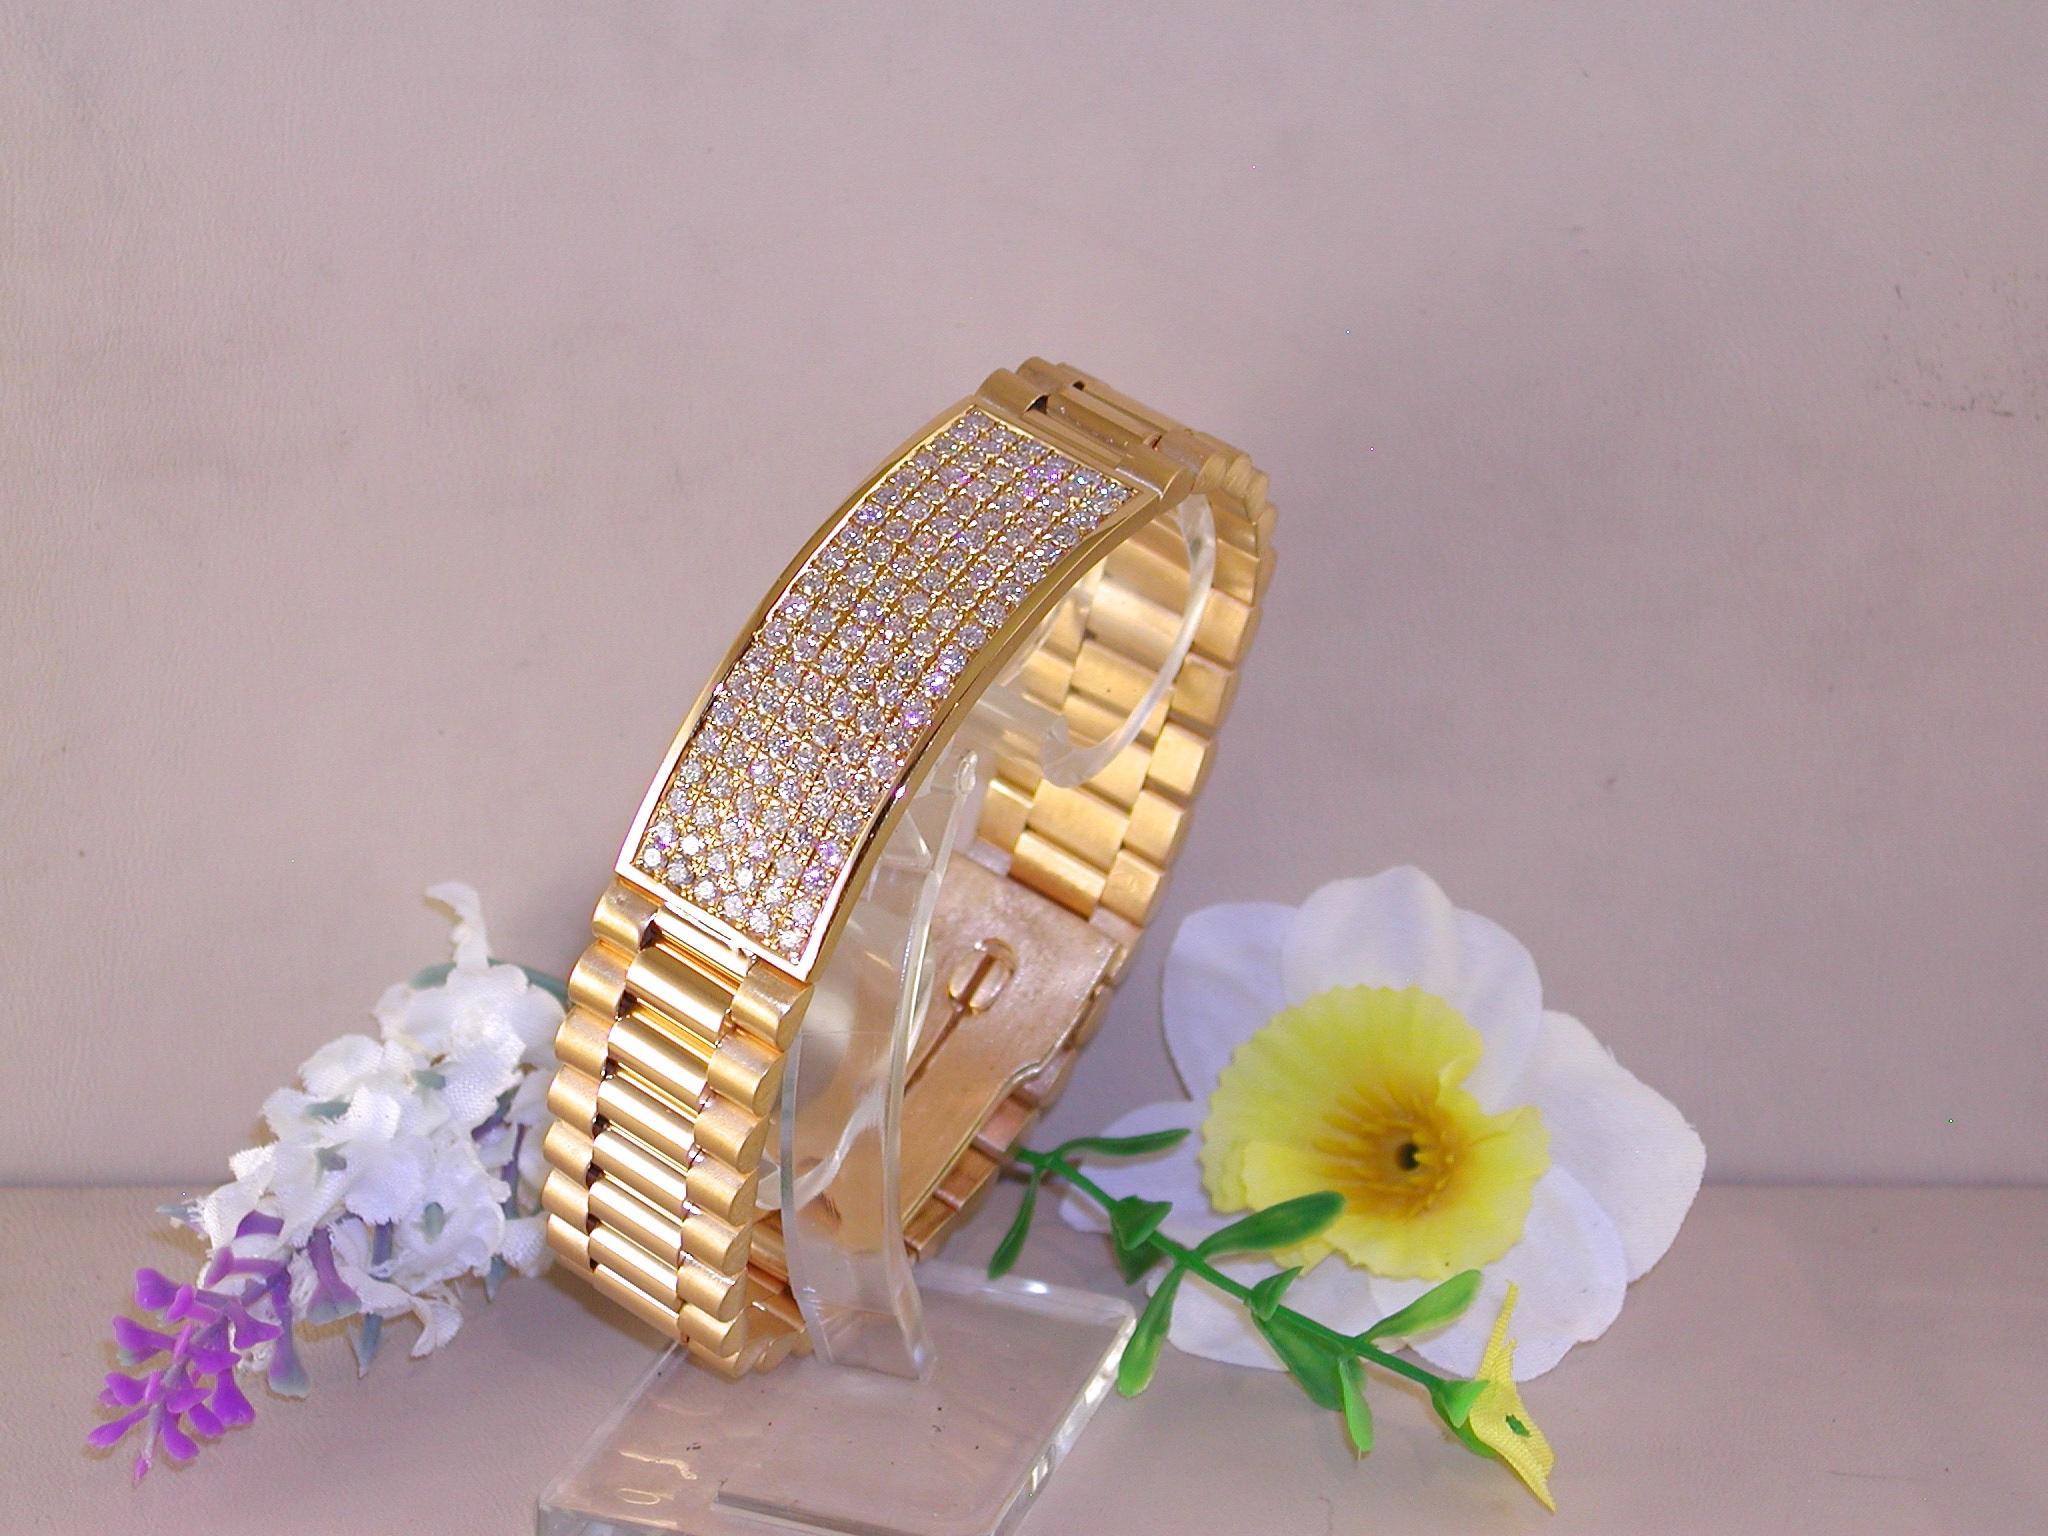 Gold: 18 kt yellow gold 
Weight: 78.85 grams
Diamonds: 4.62 ct. Colour: G  Clarity: VS2 
Length: 20.5 cm / 8.10 inches
Width: 1.70 cm. / 0.66 inch
We can lengthen or shorten the bracelet if needed
Condition: Brand New 
All our jewellery comes with a